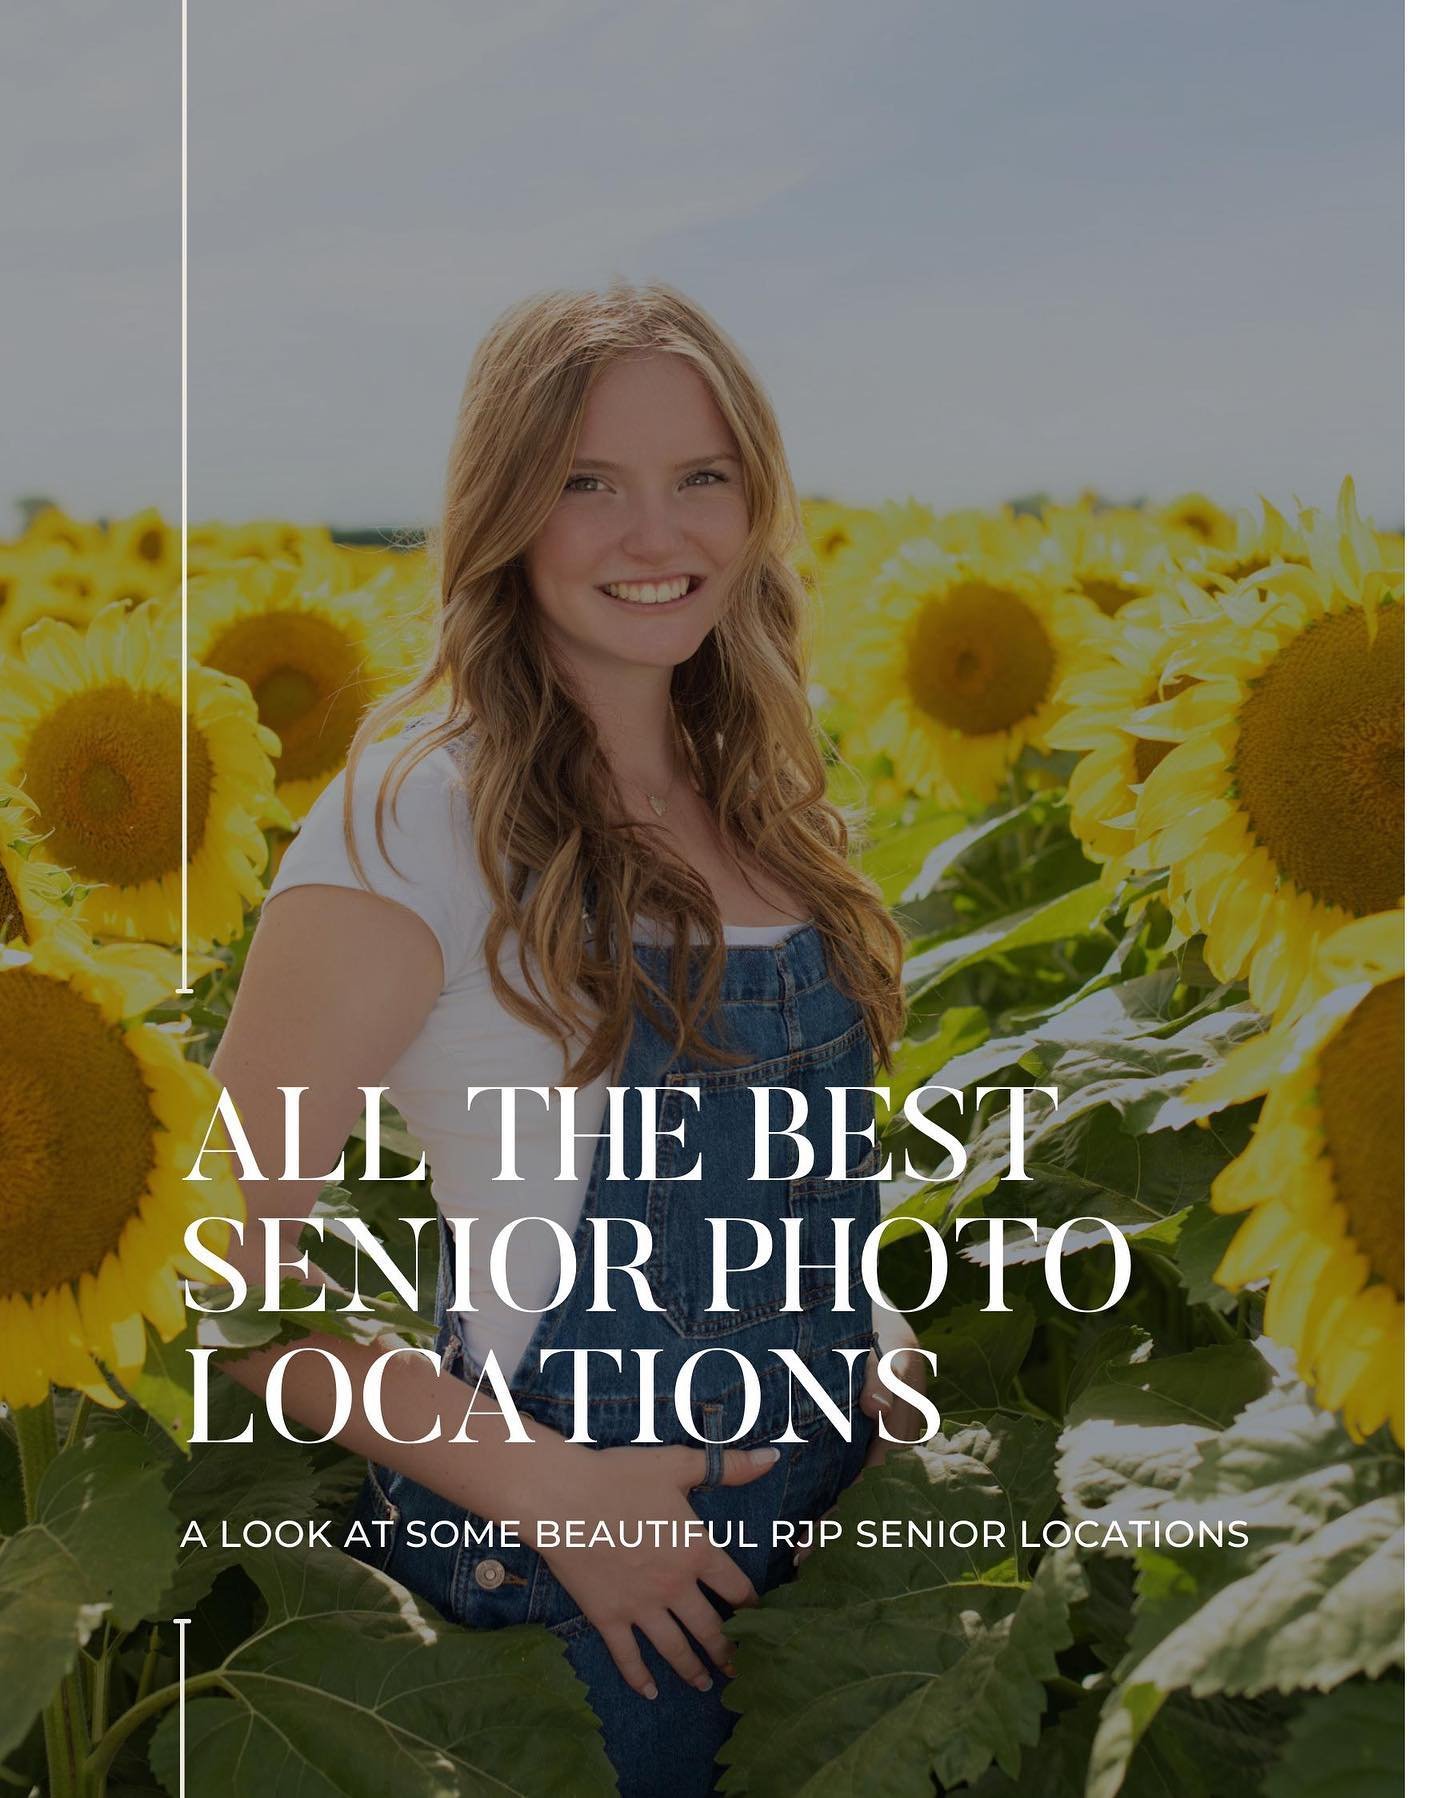 For all my clients, I want to make sure that you get the absolute BEST locations!

That&rsquo;s why rather than doing a short session, each RJP Senior gets the FULL experience! That means not just photographing in one location, but taking you to all 